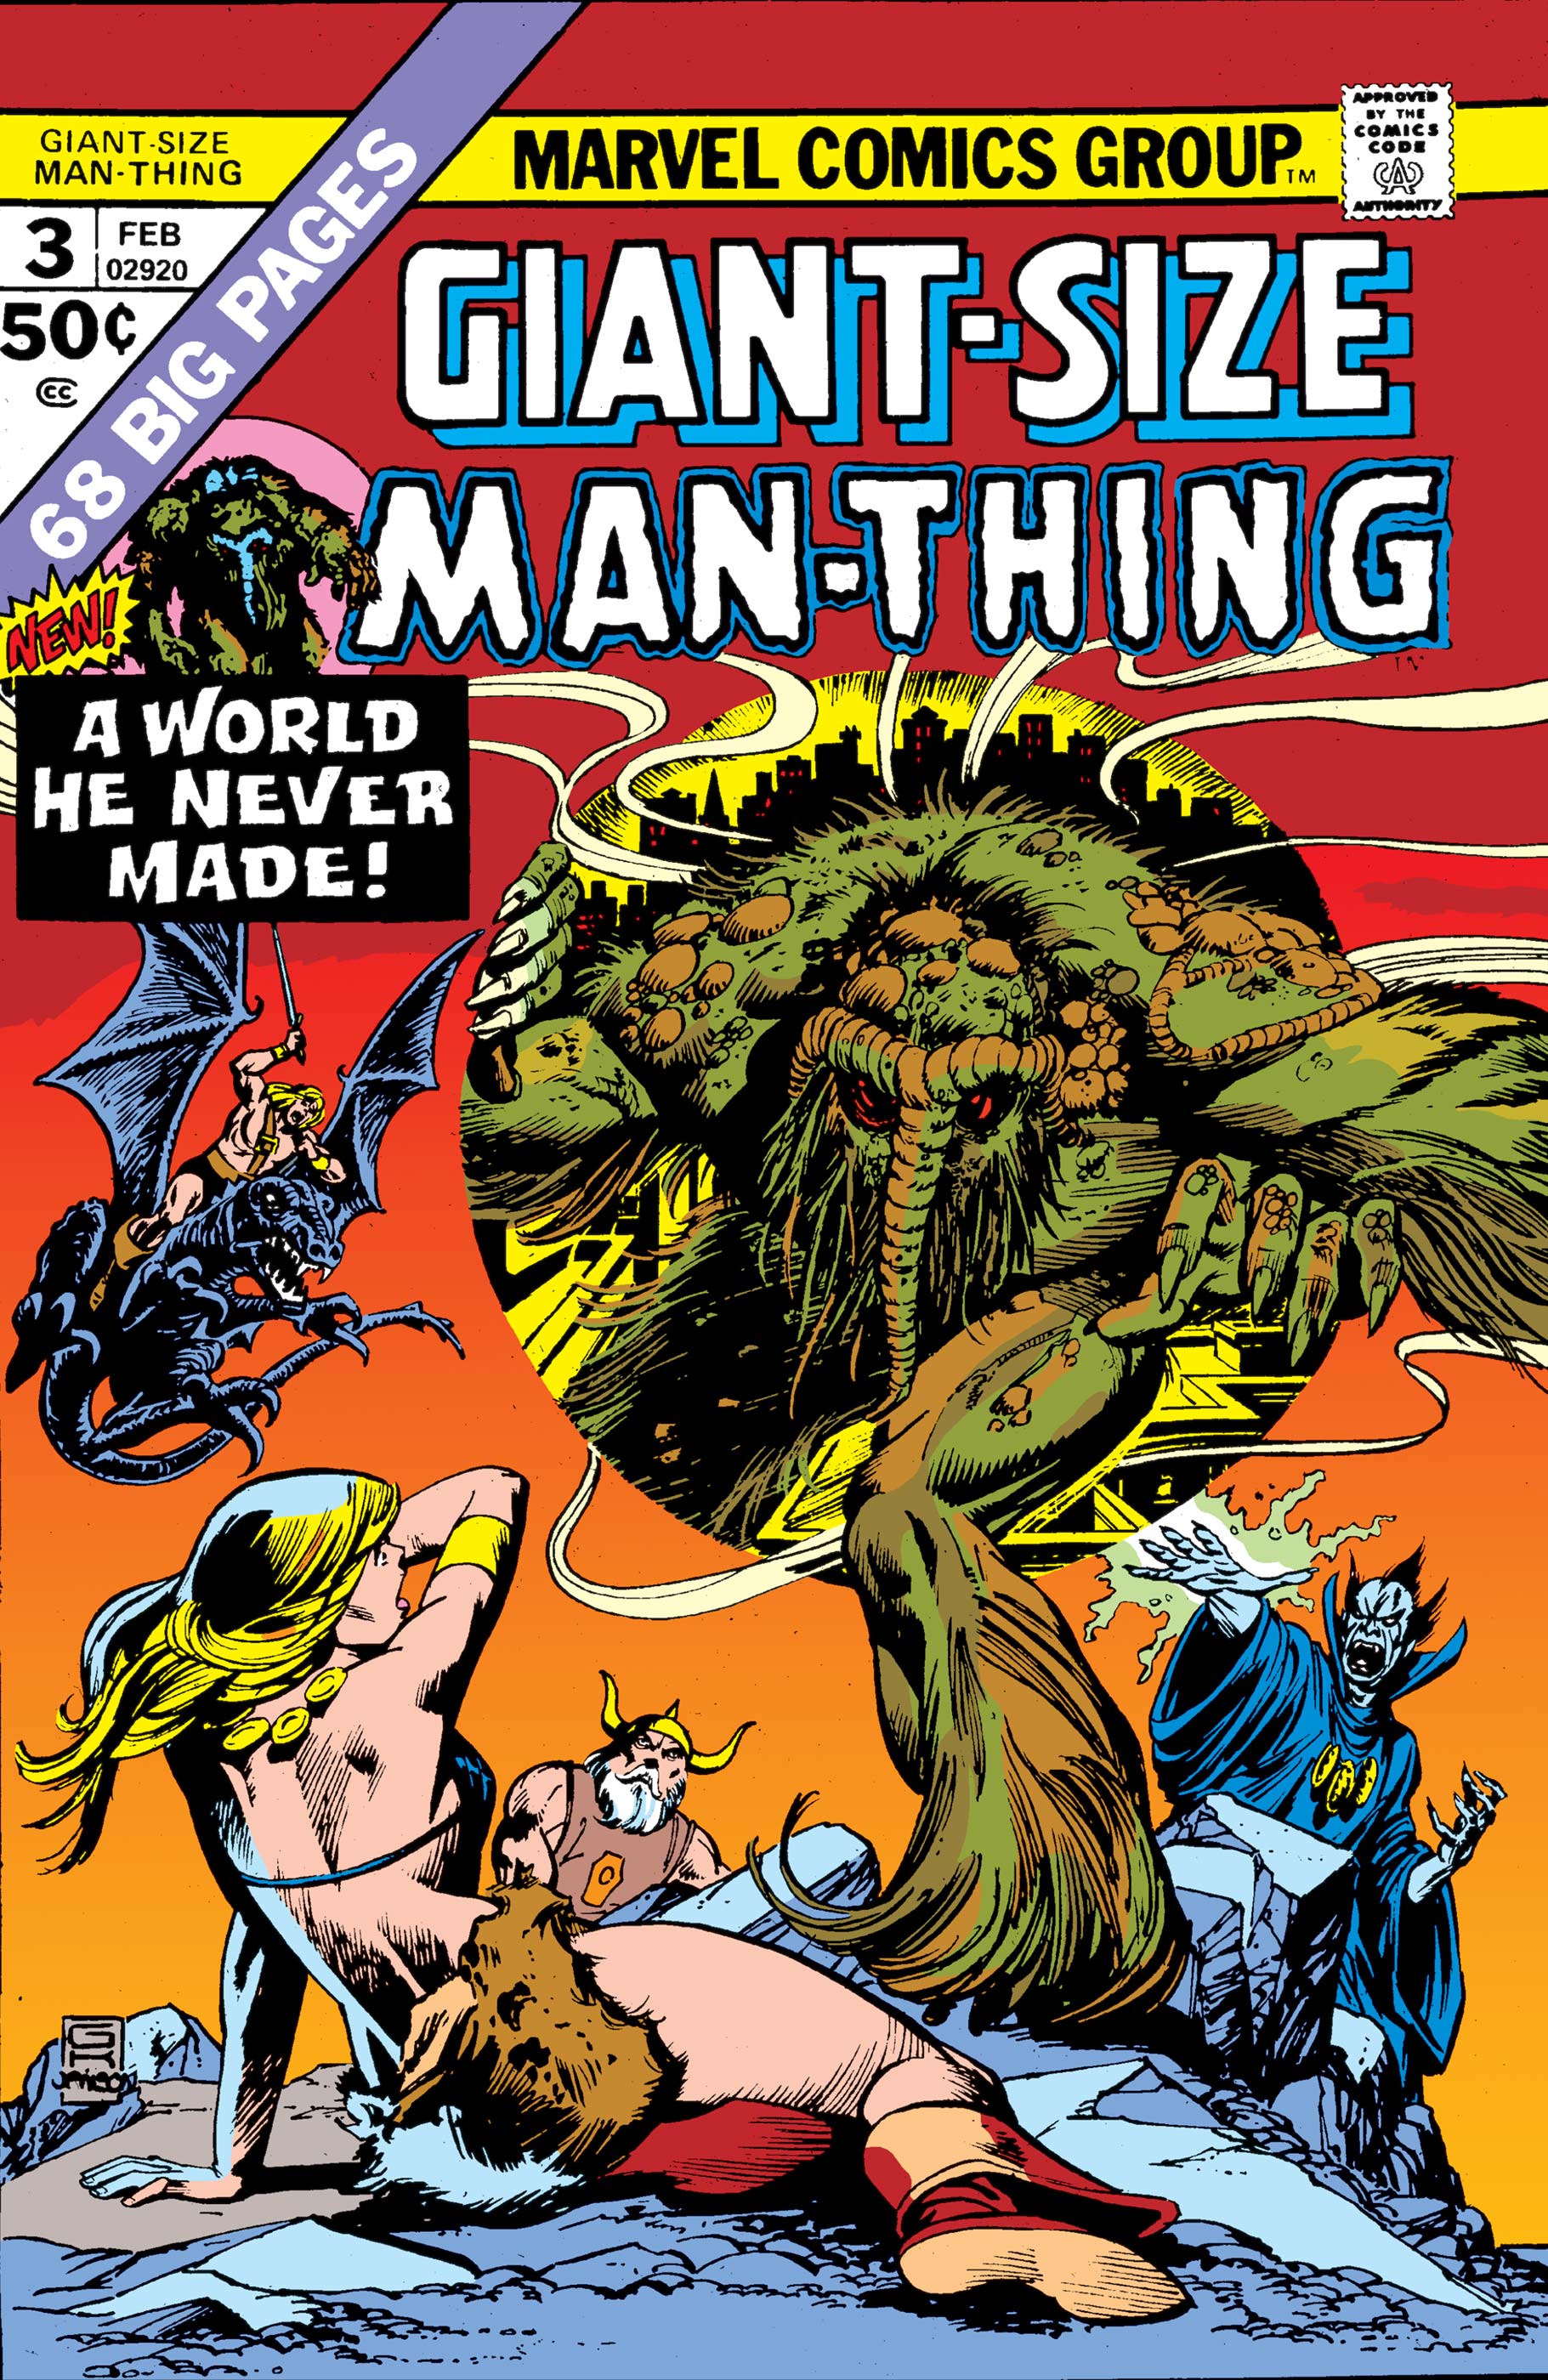 Giant-Size Man-Thing (1974) #3